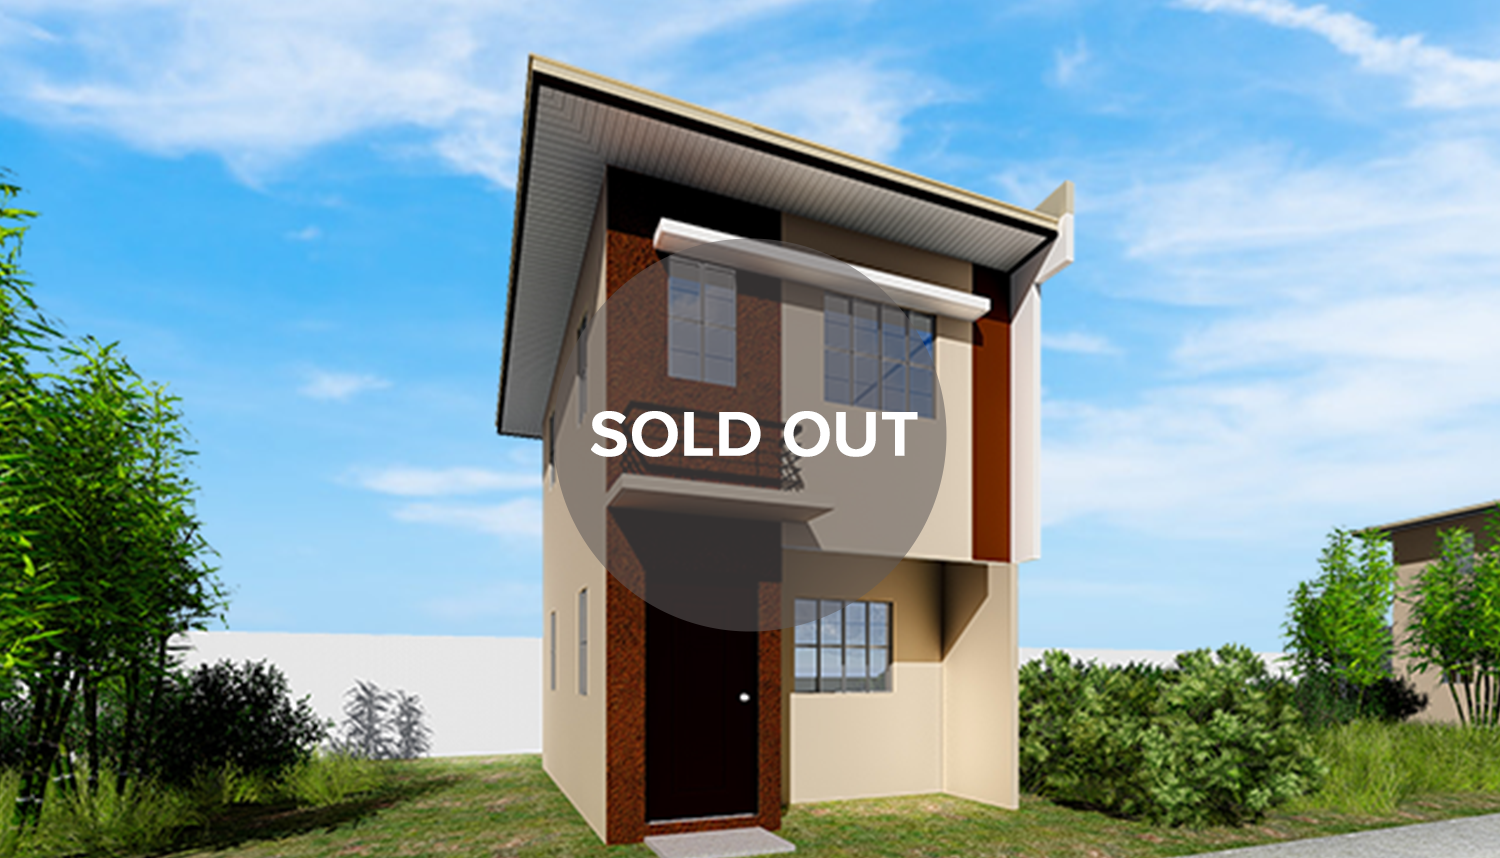 armina single firewall artist perspective 2 sold out | Affordable House and Lot For Sale In The Philippines